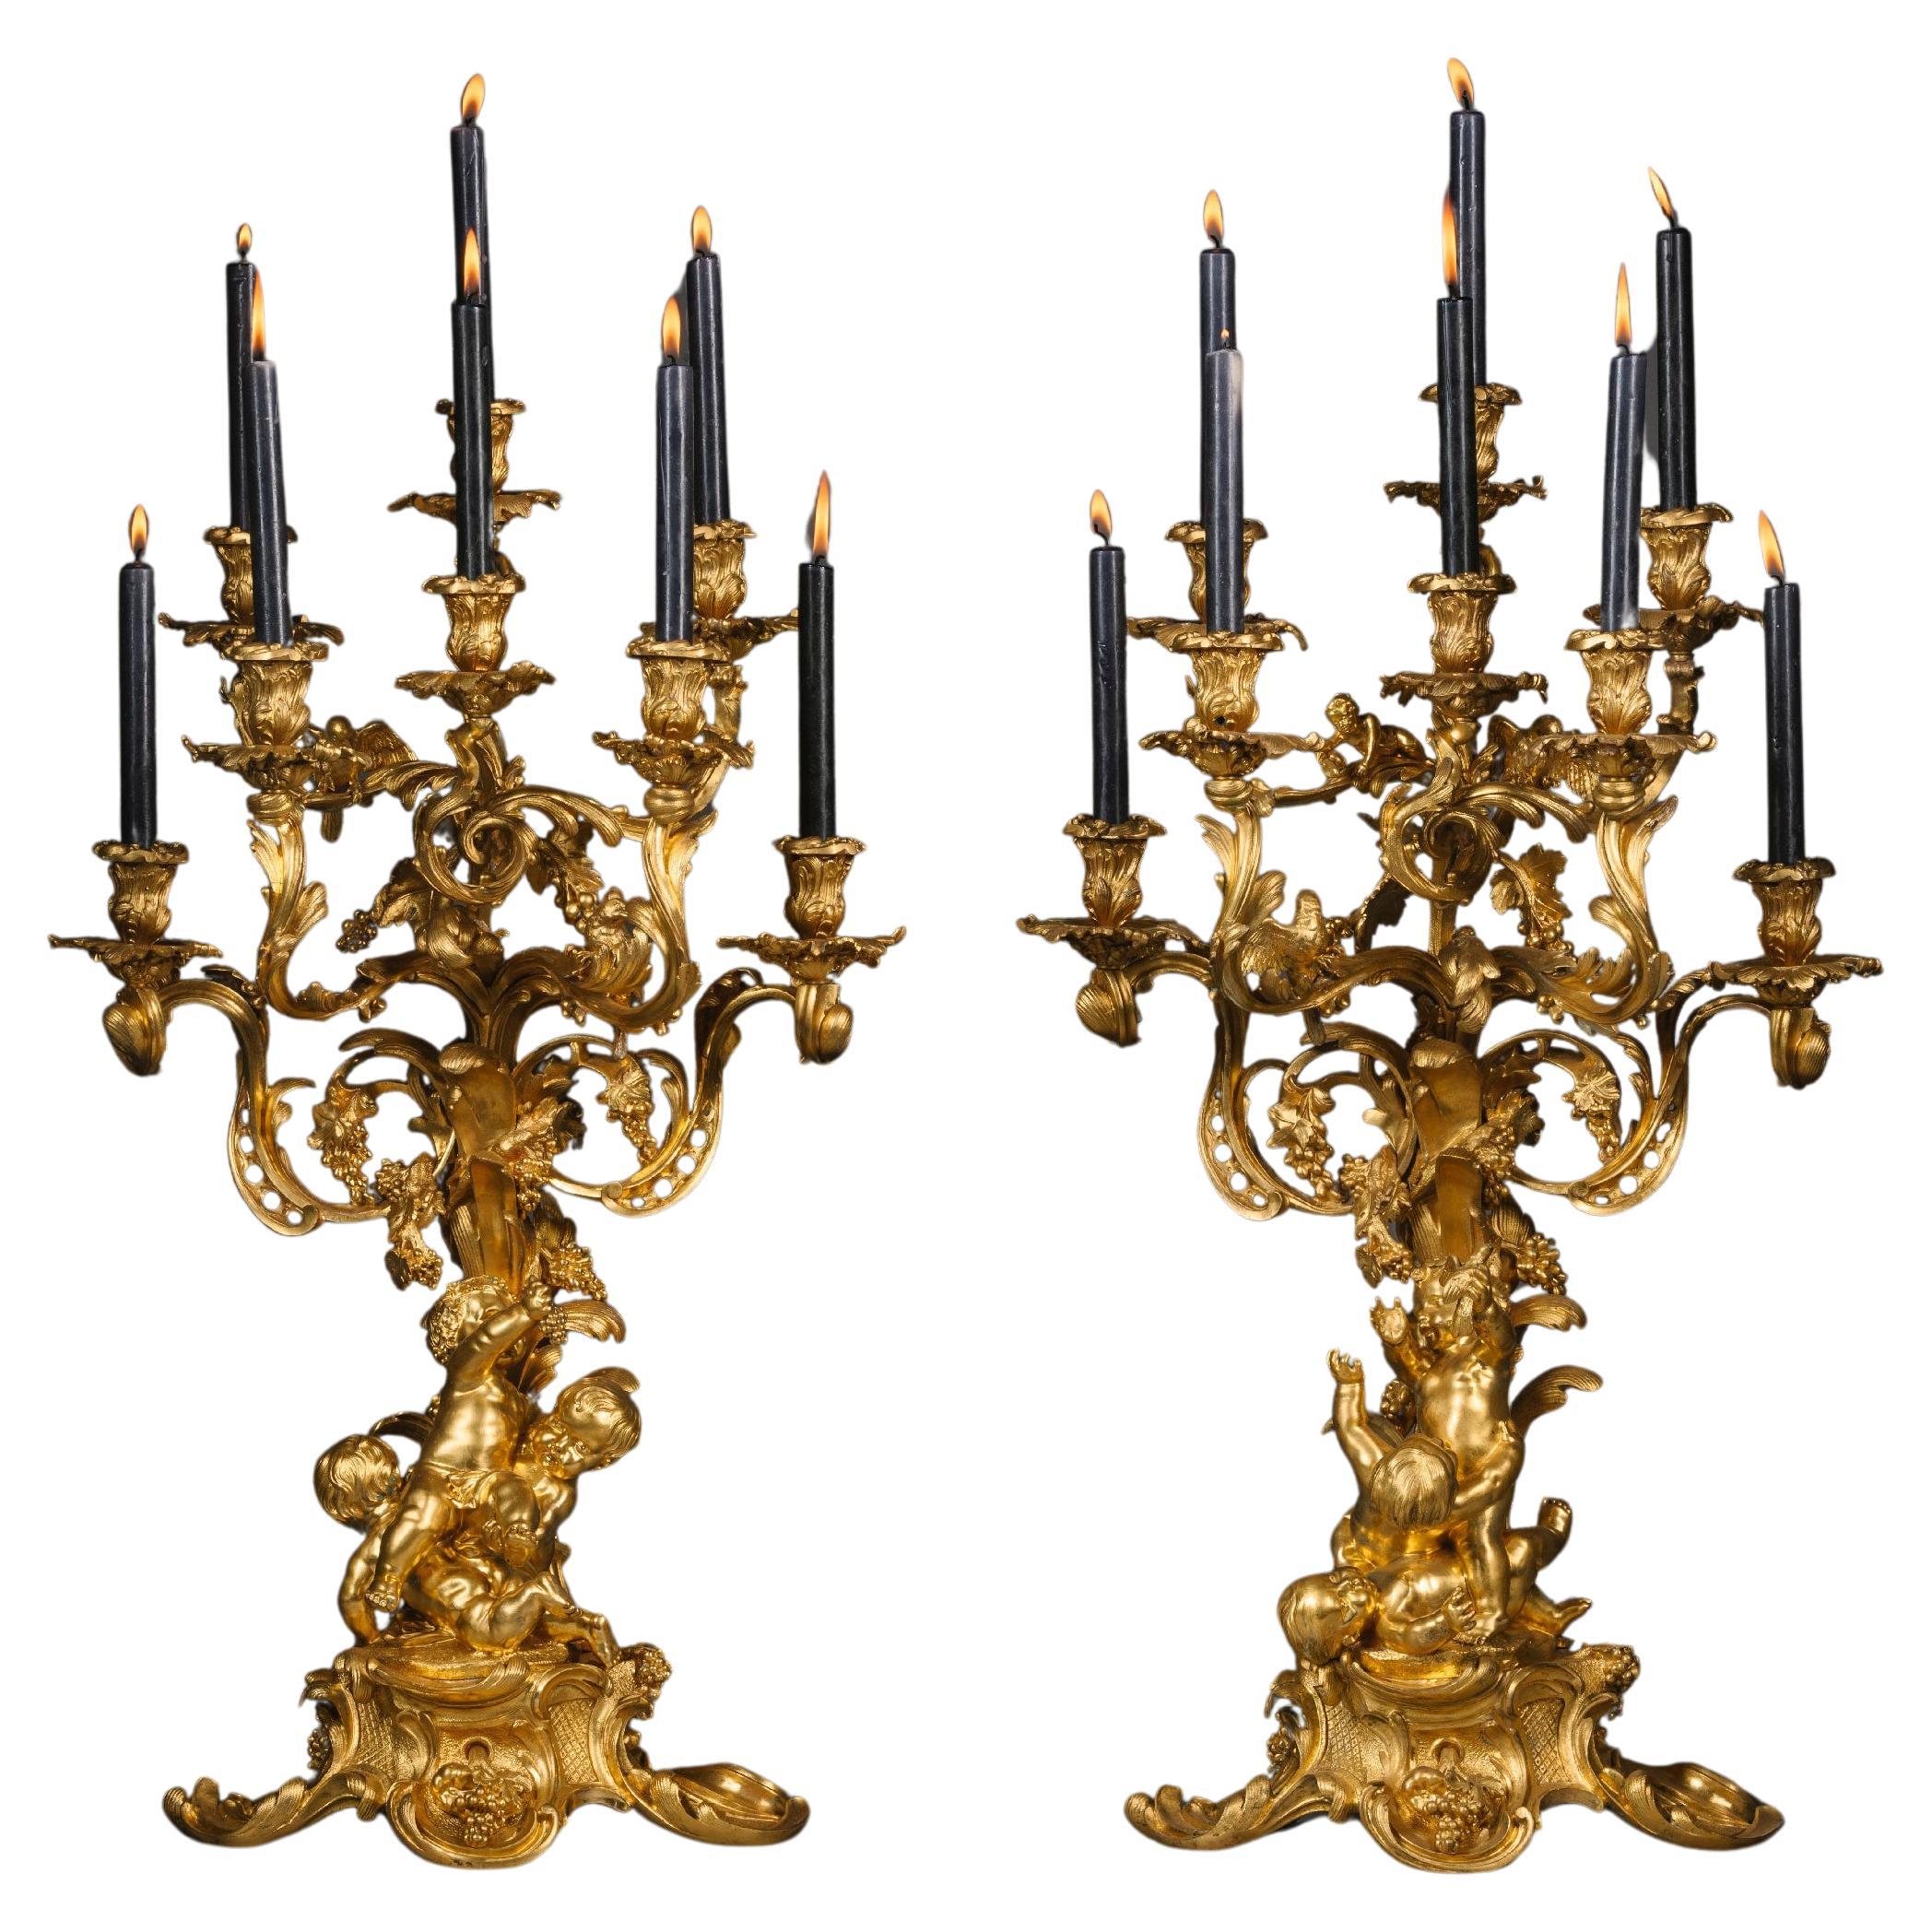 Pair of Louis XV Style Eight-Light Candelabra, Attributed to Victor Paillard